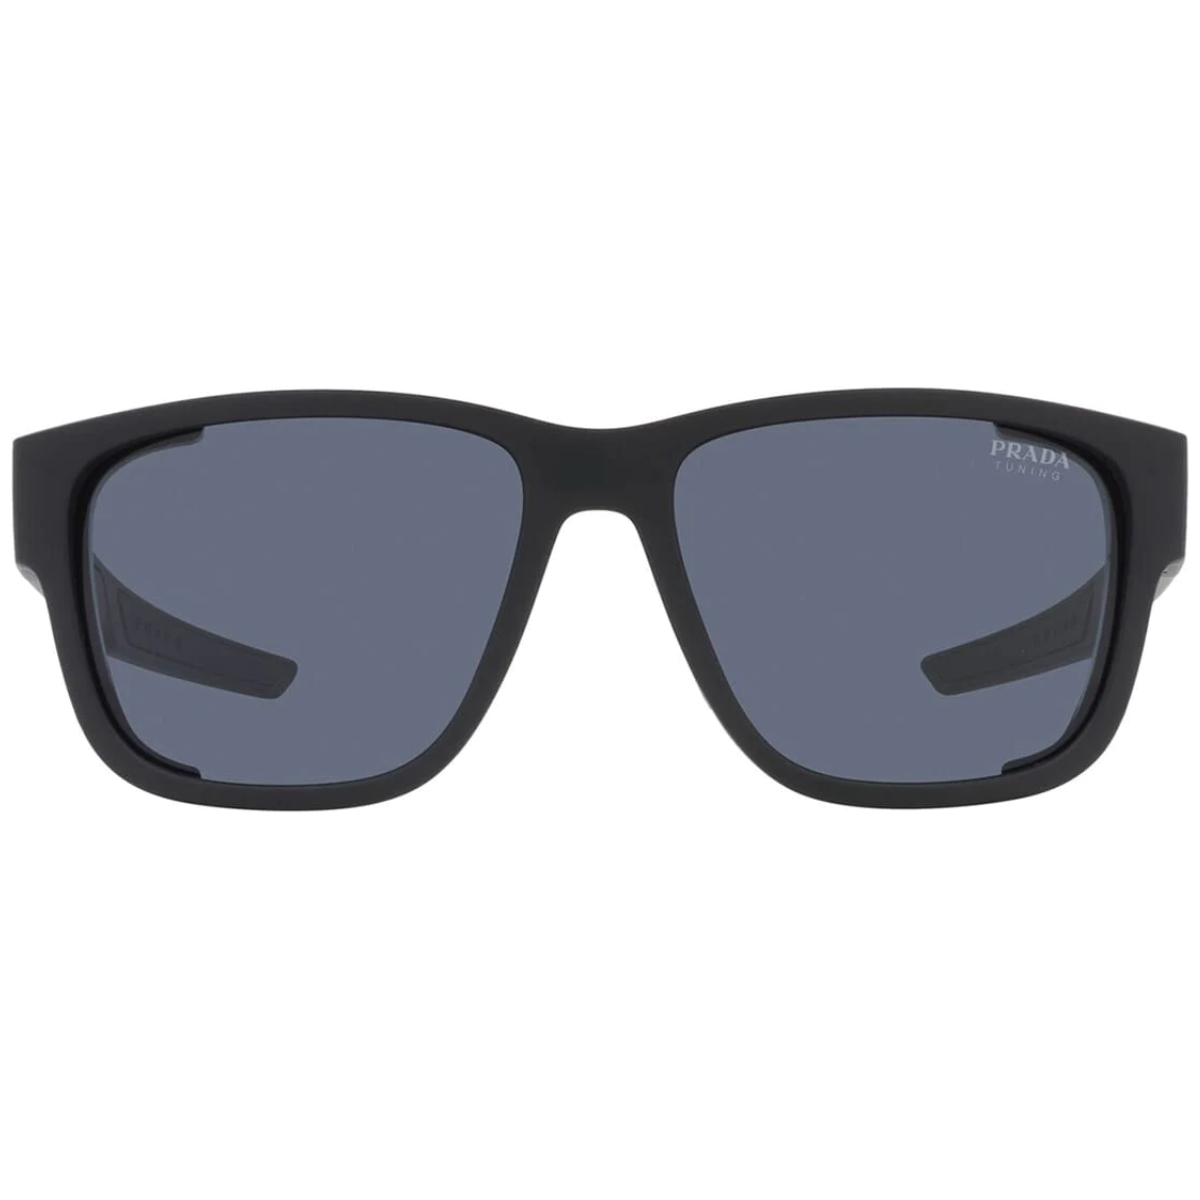  "Shop now for Prada SPS 07WS DG009S sunglasses for men at Optorium. Elevate your style with these stylish black rubber rectangle shades, equipped with blue lenses and crafted with high-quality acetate."